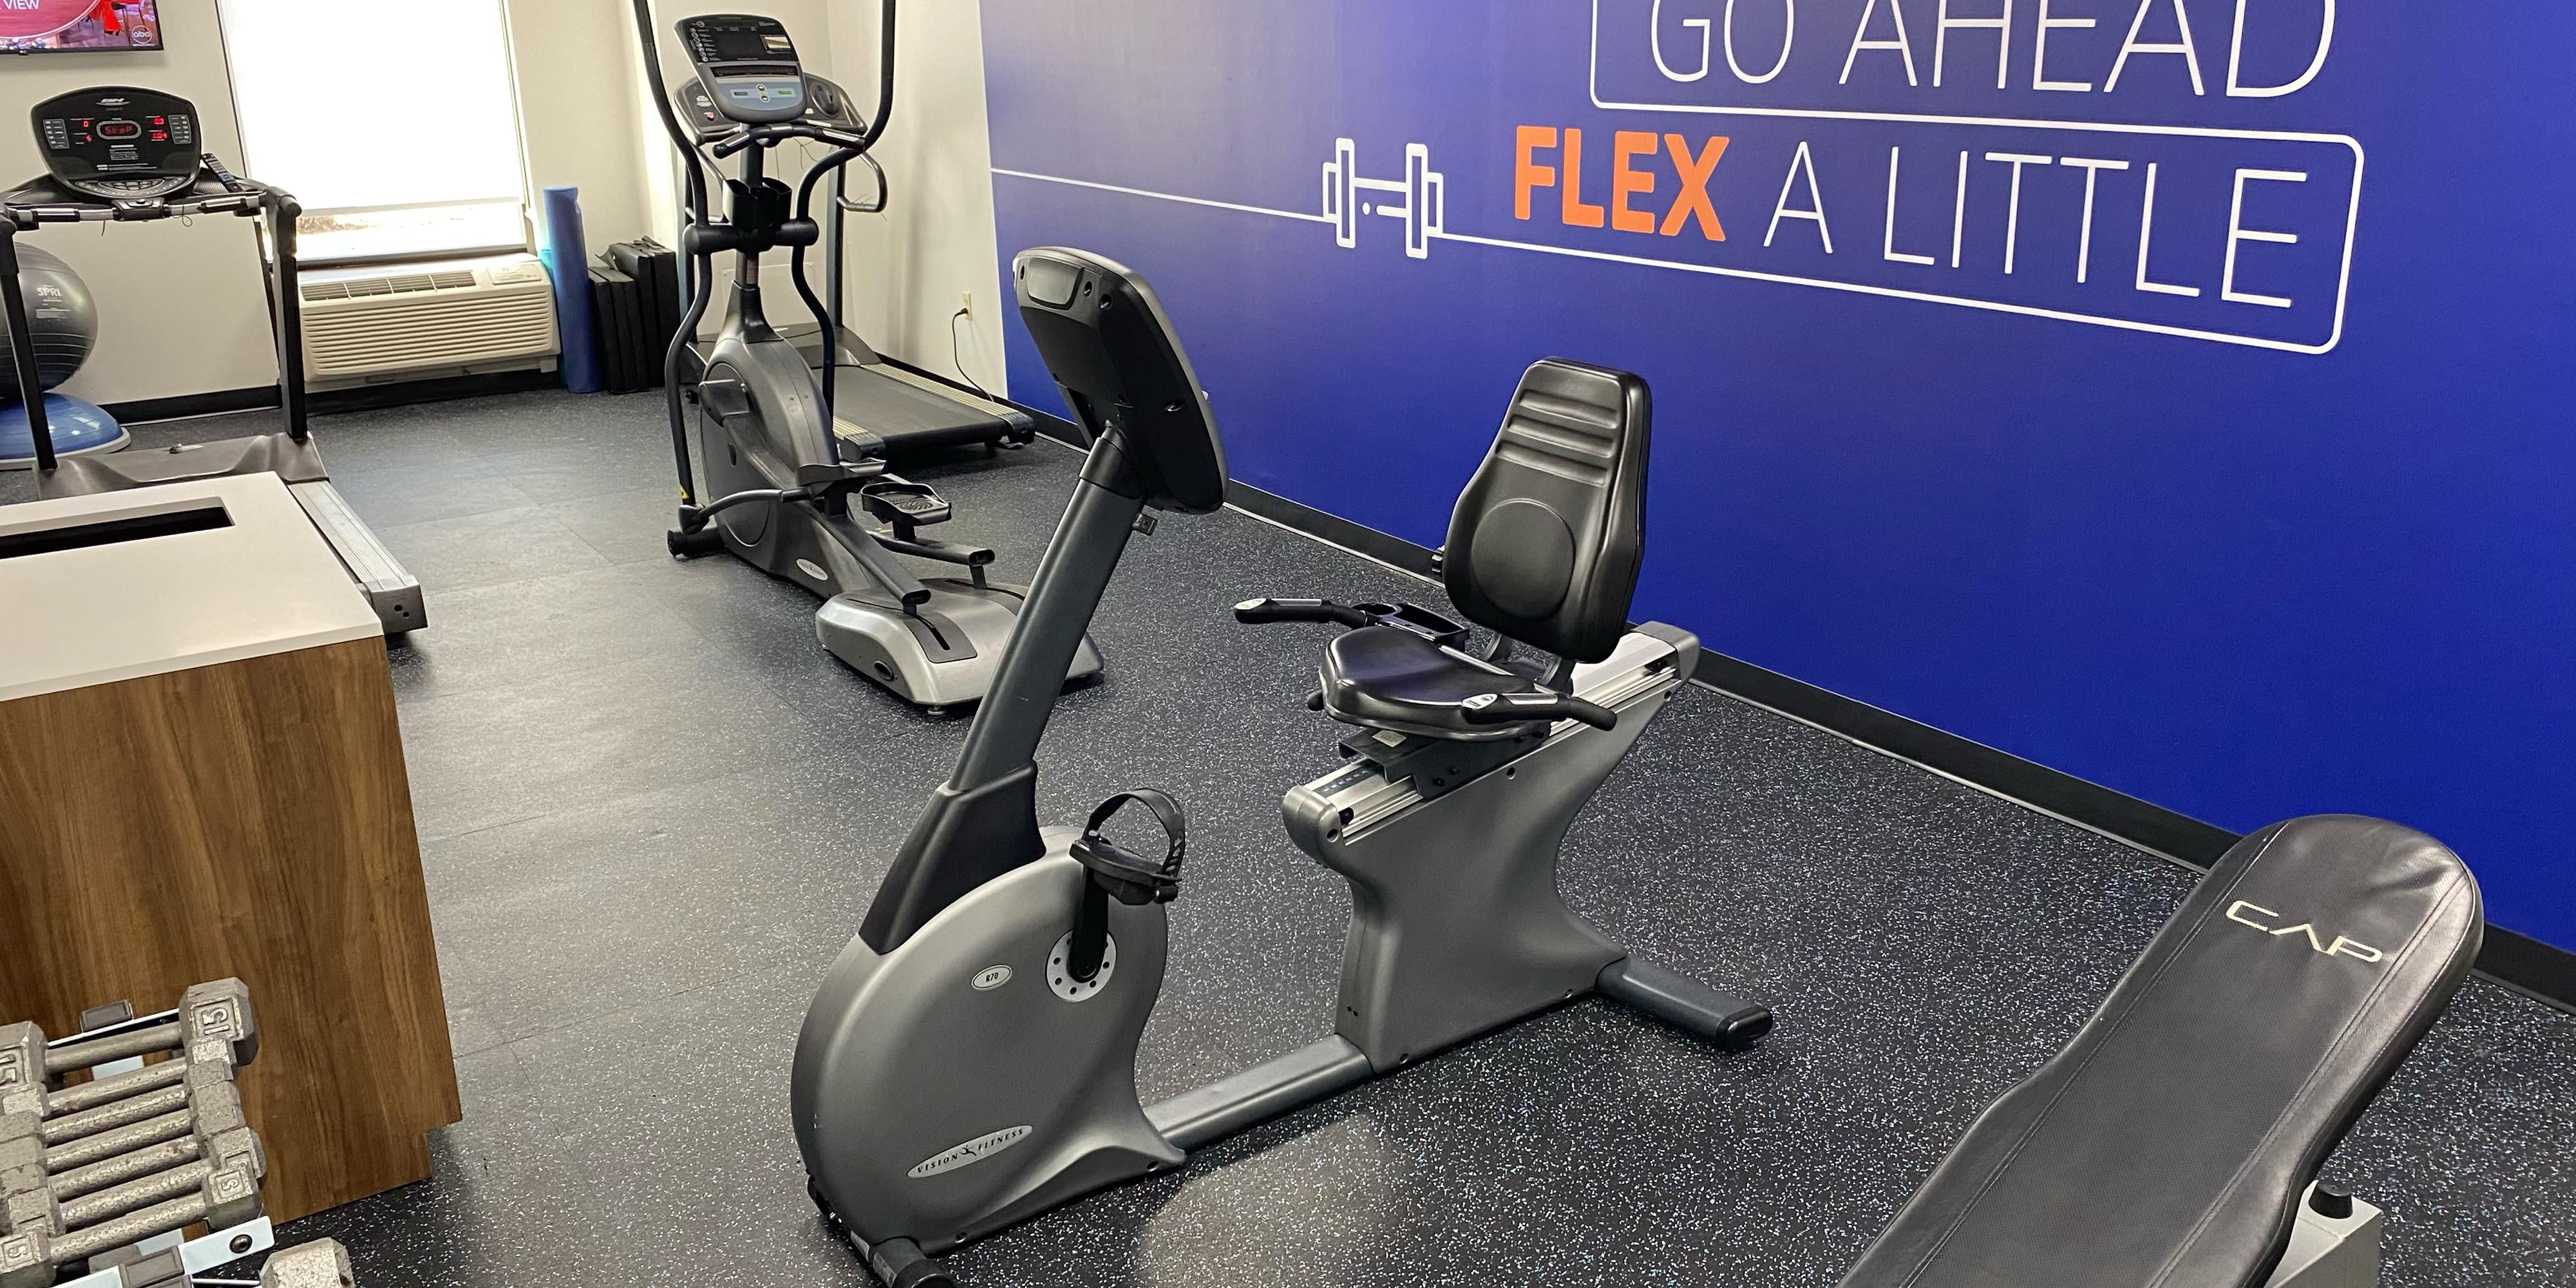 Don't miss your daily workout routine just because you're on the road! Available 24 hours daily to all guests. The fitness center offers state-of-the-art equipment, such as, a treadmill, elliptical machine, bicycle, and more.
